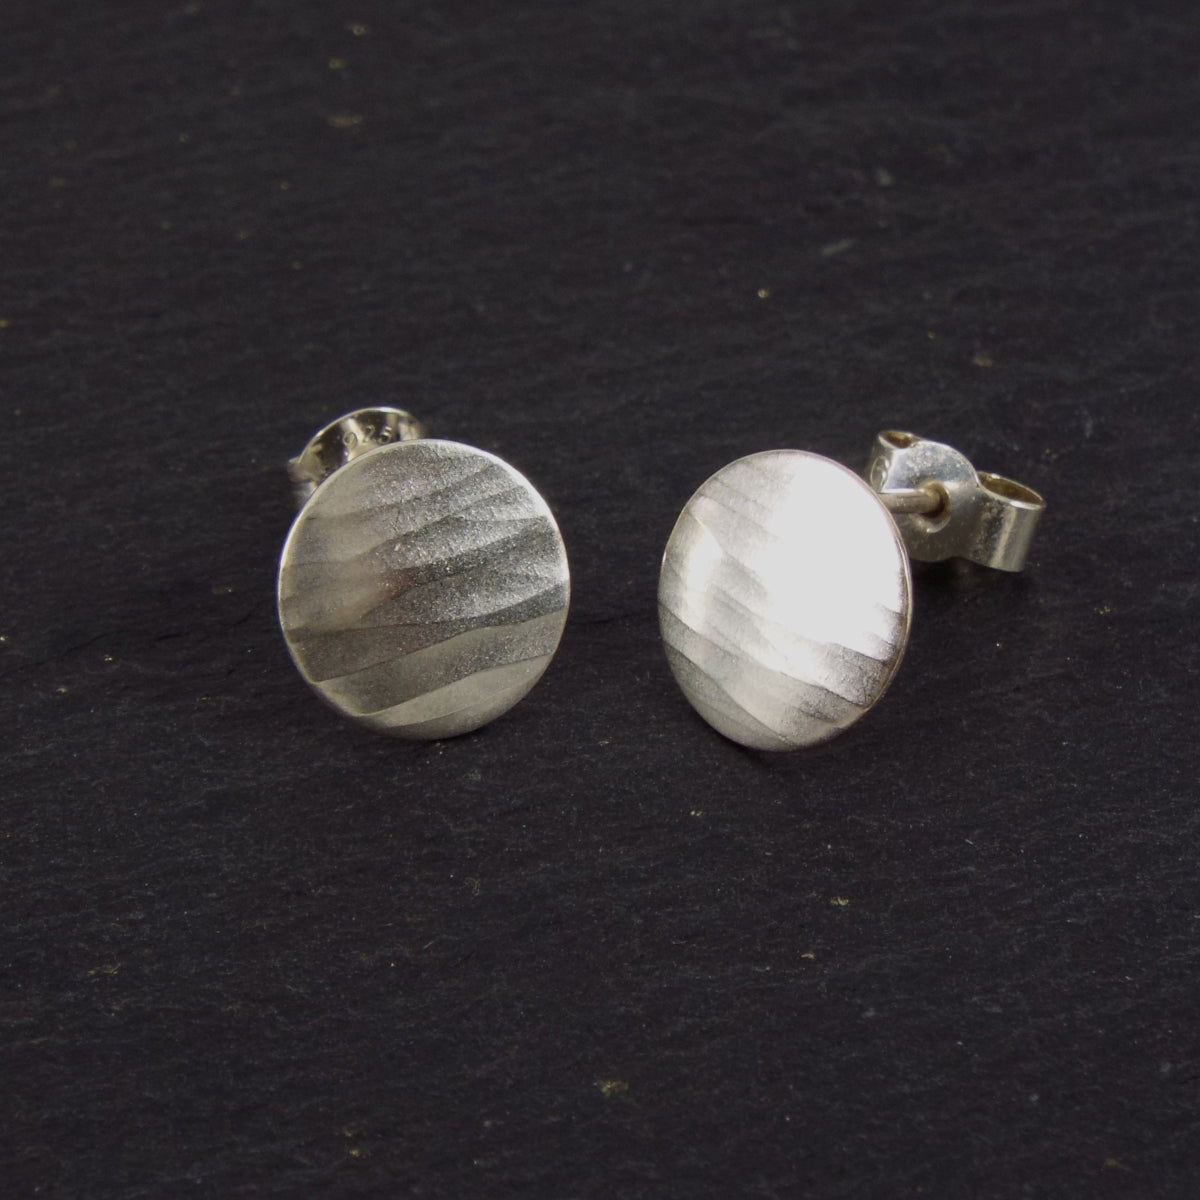 A pair of disc-shaped hammered silver earrings, 10mm across, with a satin-matte finish. The hammered texture of the studs is strongly horizontal.